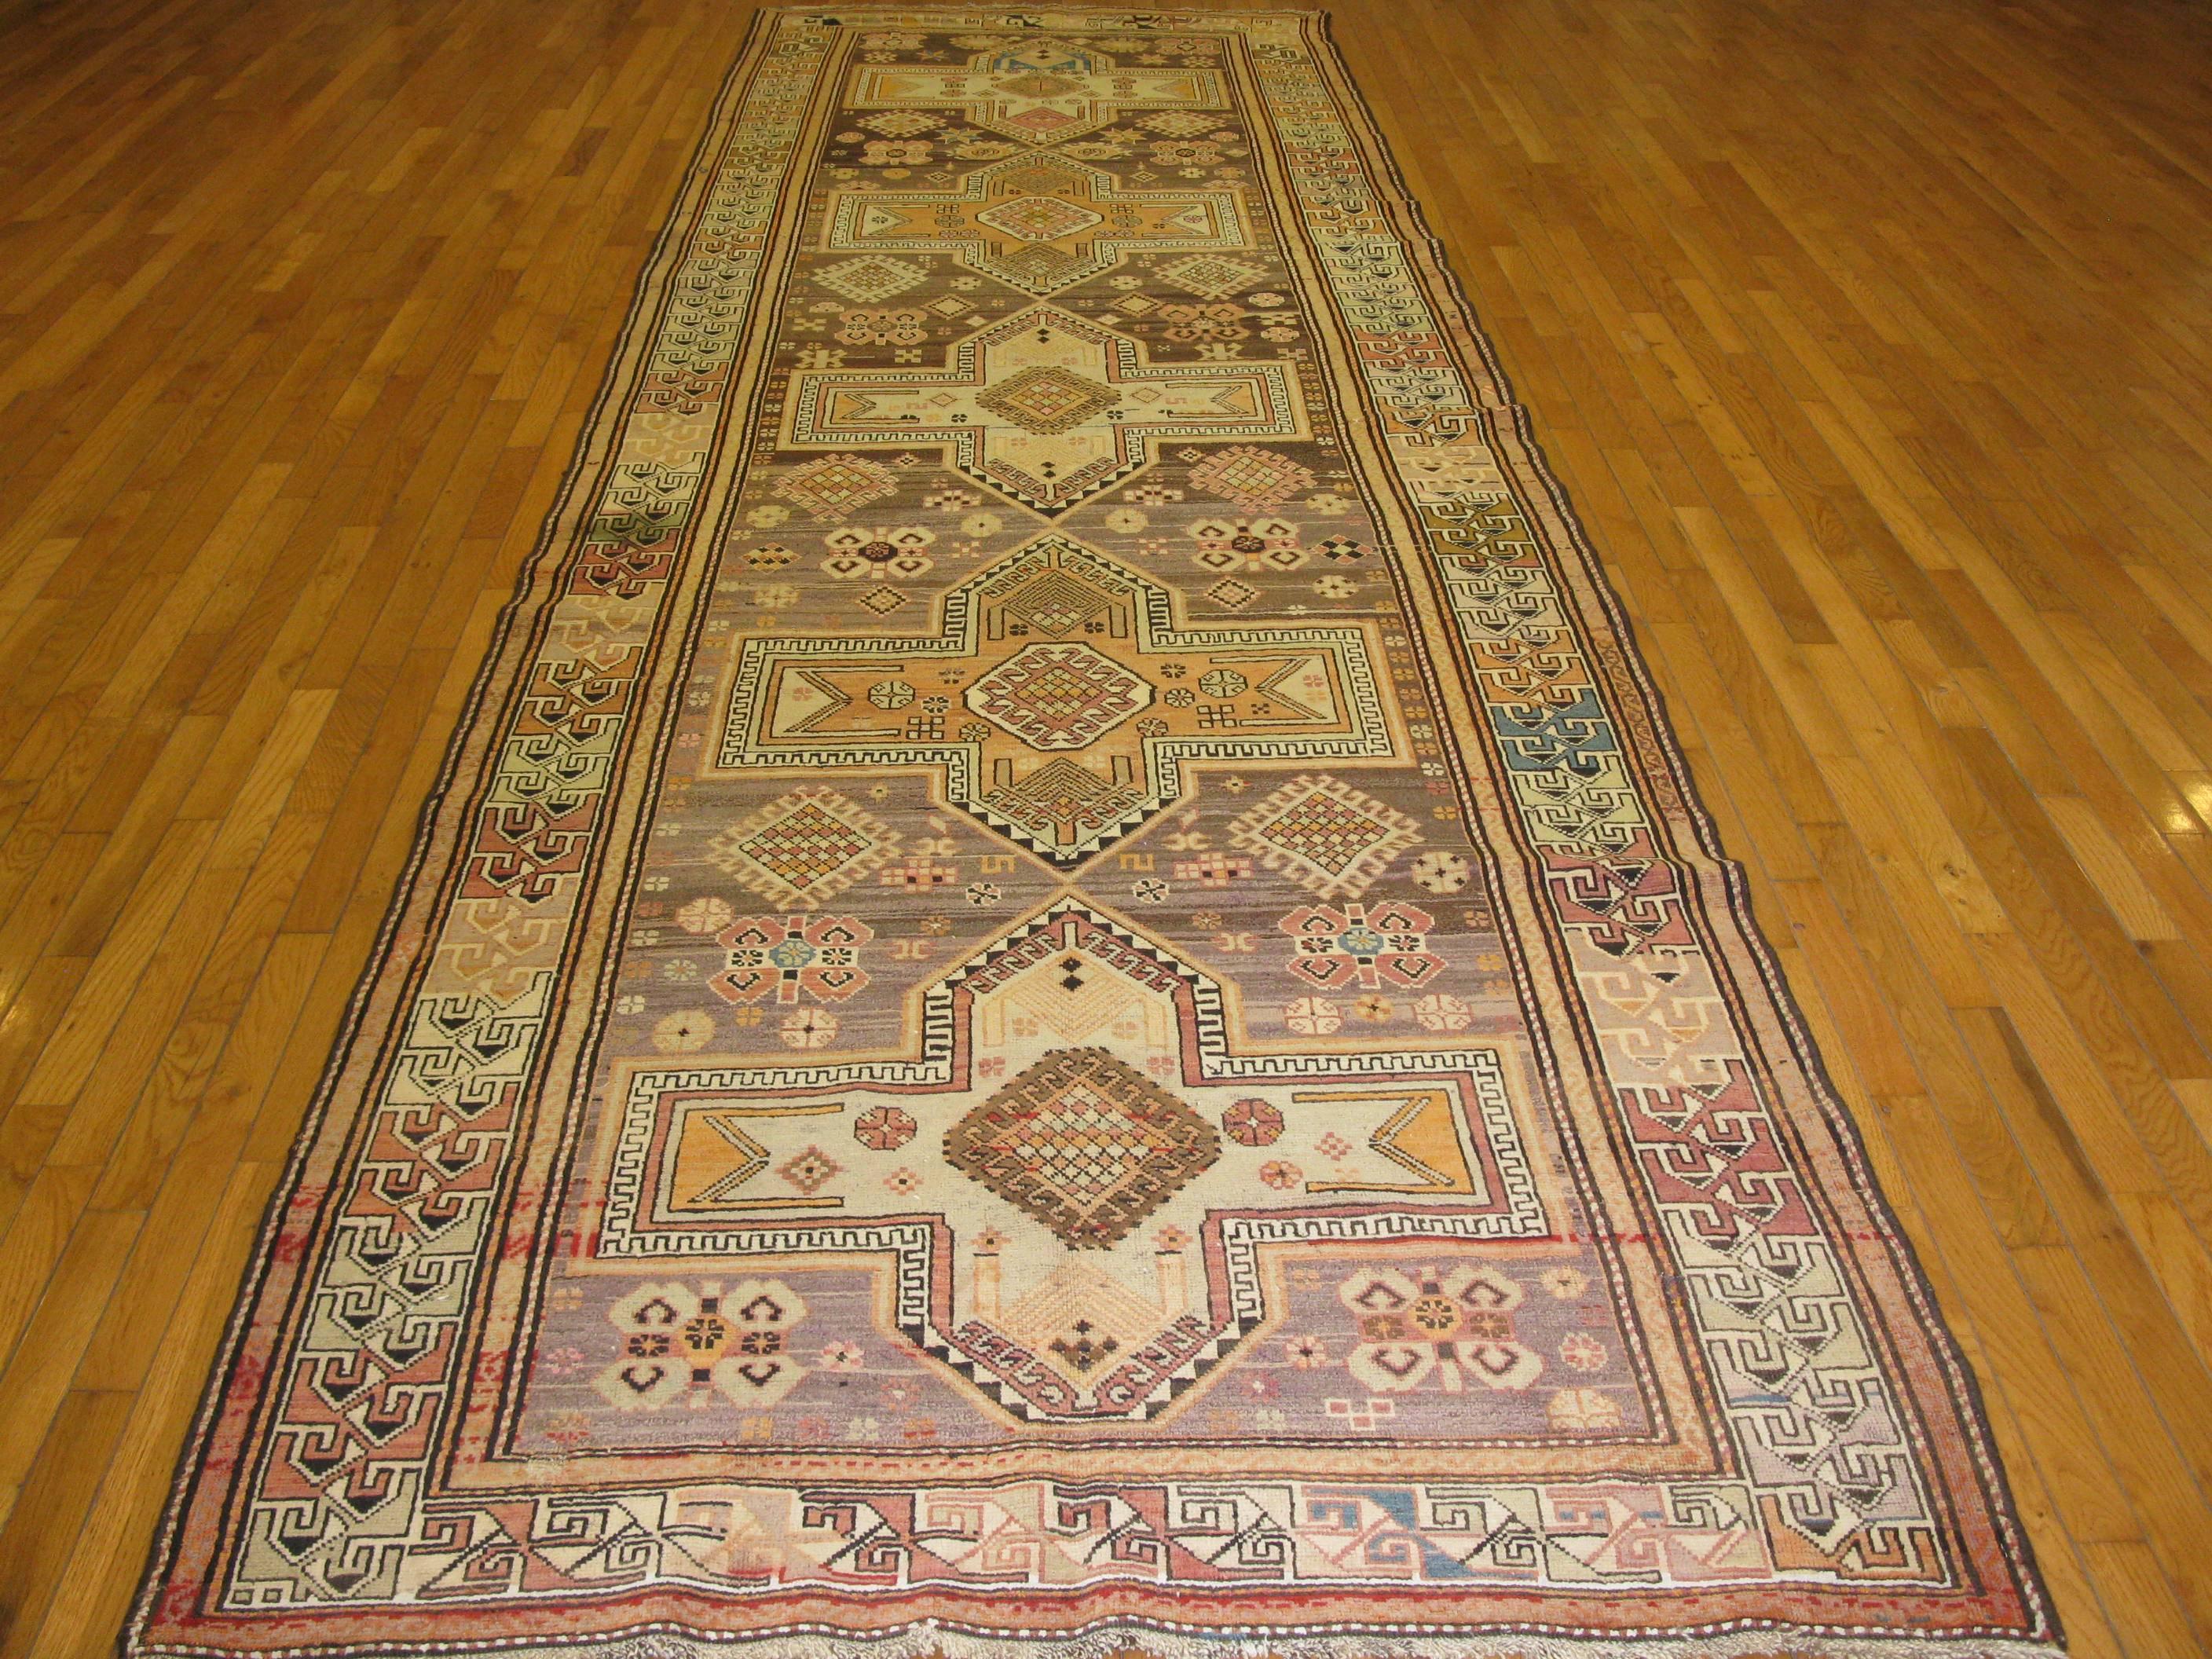 Caucasian Kazak rugs are among the best and most sought after nomadic look rugs of late 19th and early 20th century rugs. This beautiful runner is hand-knotted with all wool and natural dyes. It measures 4' 5'' x 15' 5'' and in great condition.